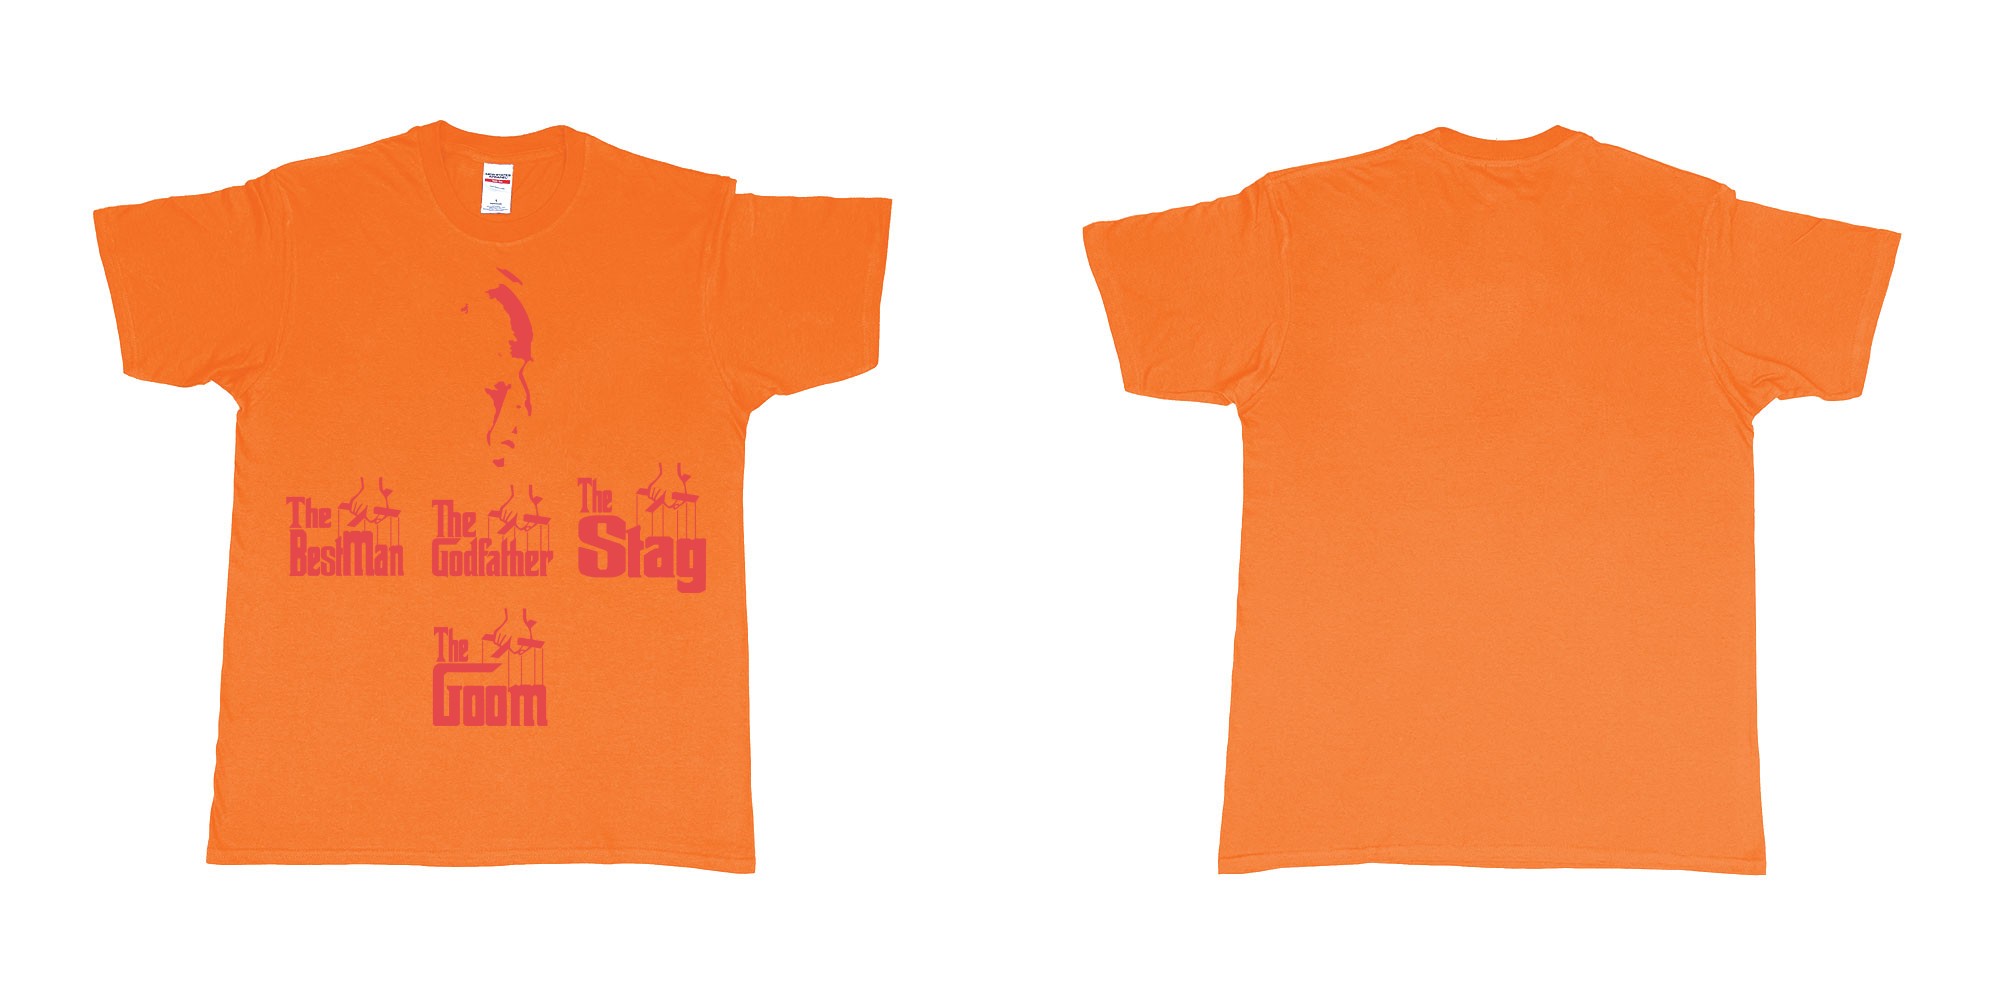 Custom tshirt design TPW the godfather in fabric color orange choice your own text made in Bali by The Pirate Way